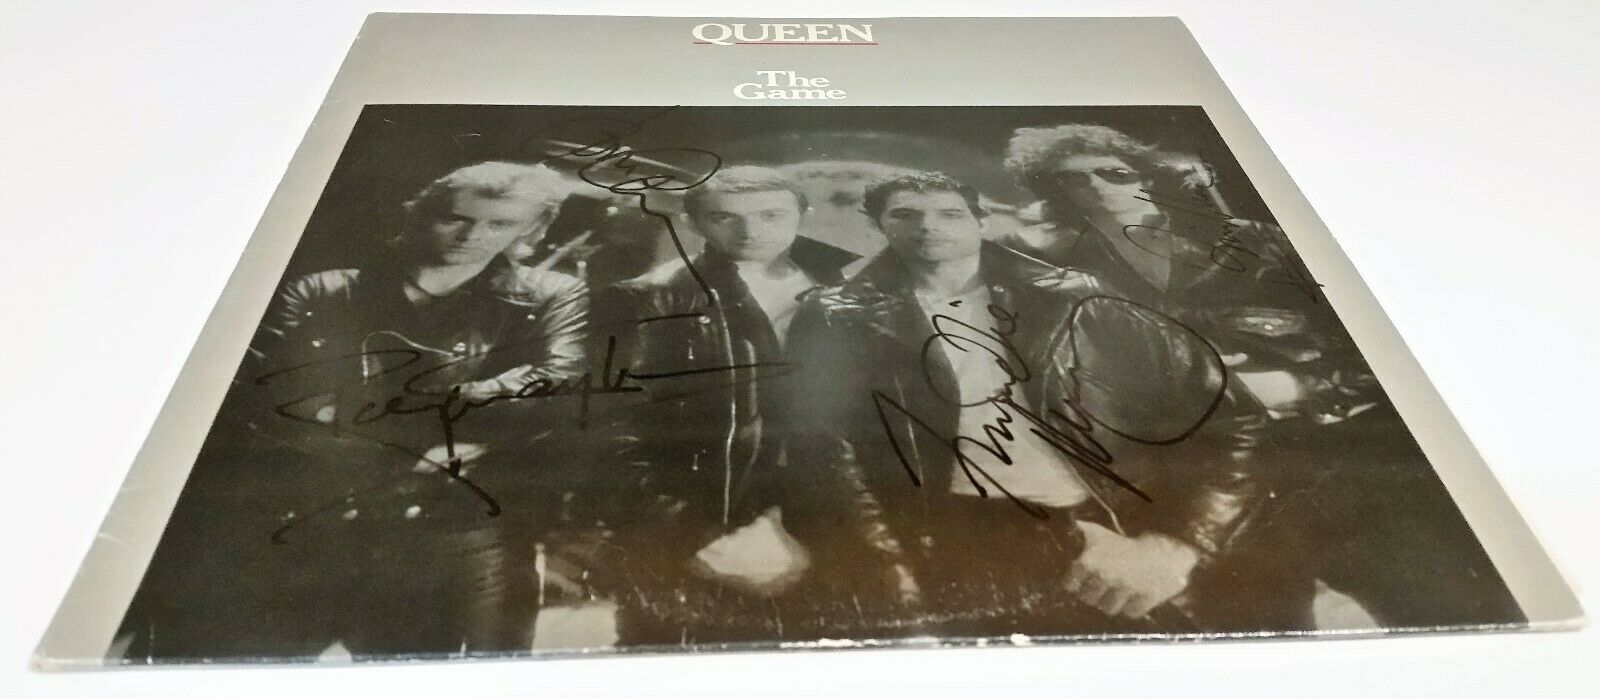 Queen Autographed “The Game” Freddie Mercury